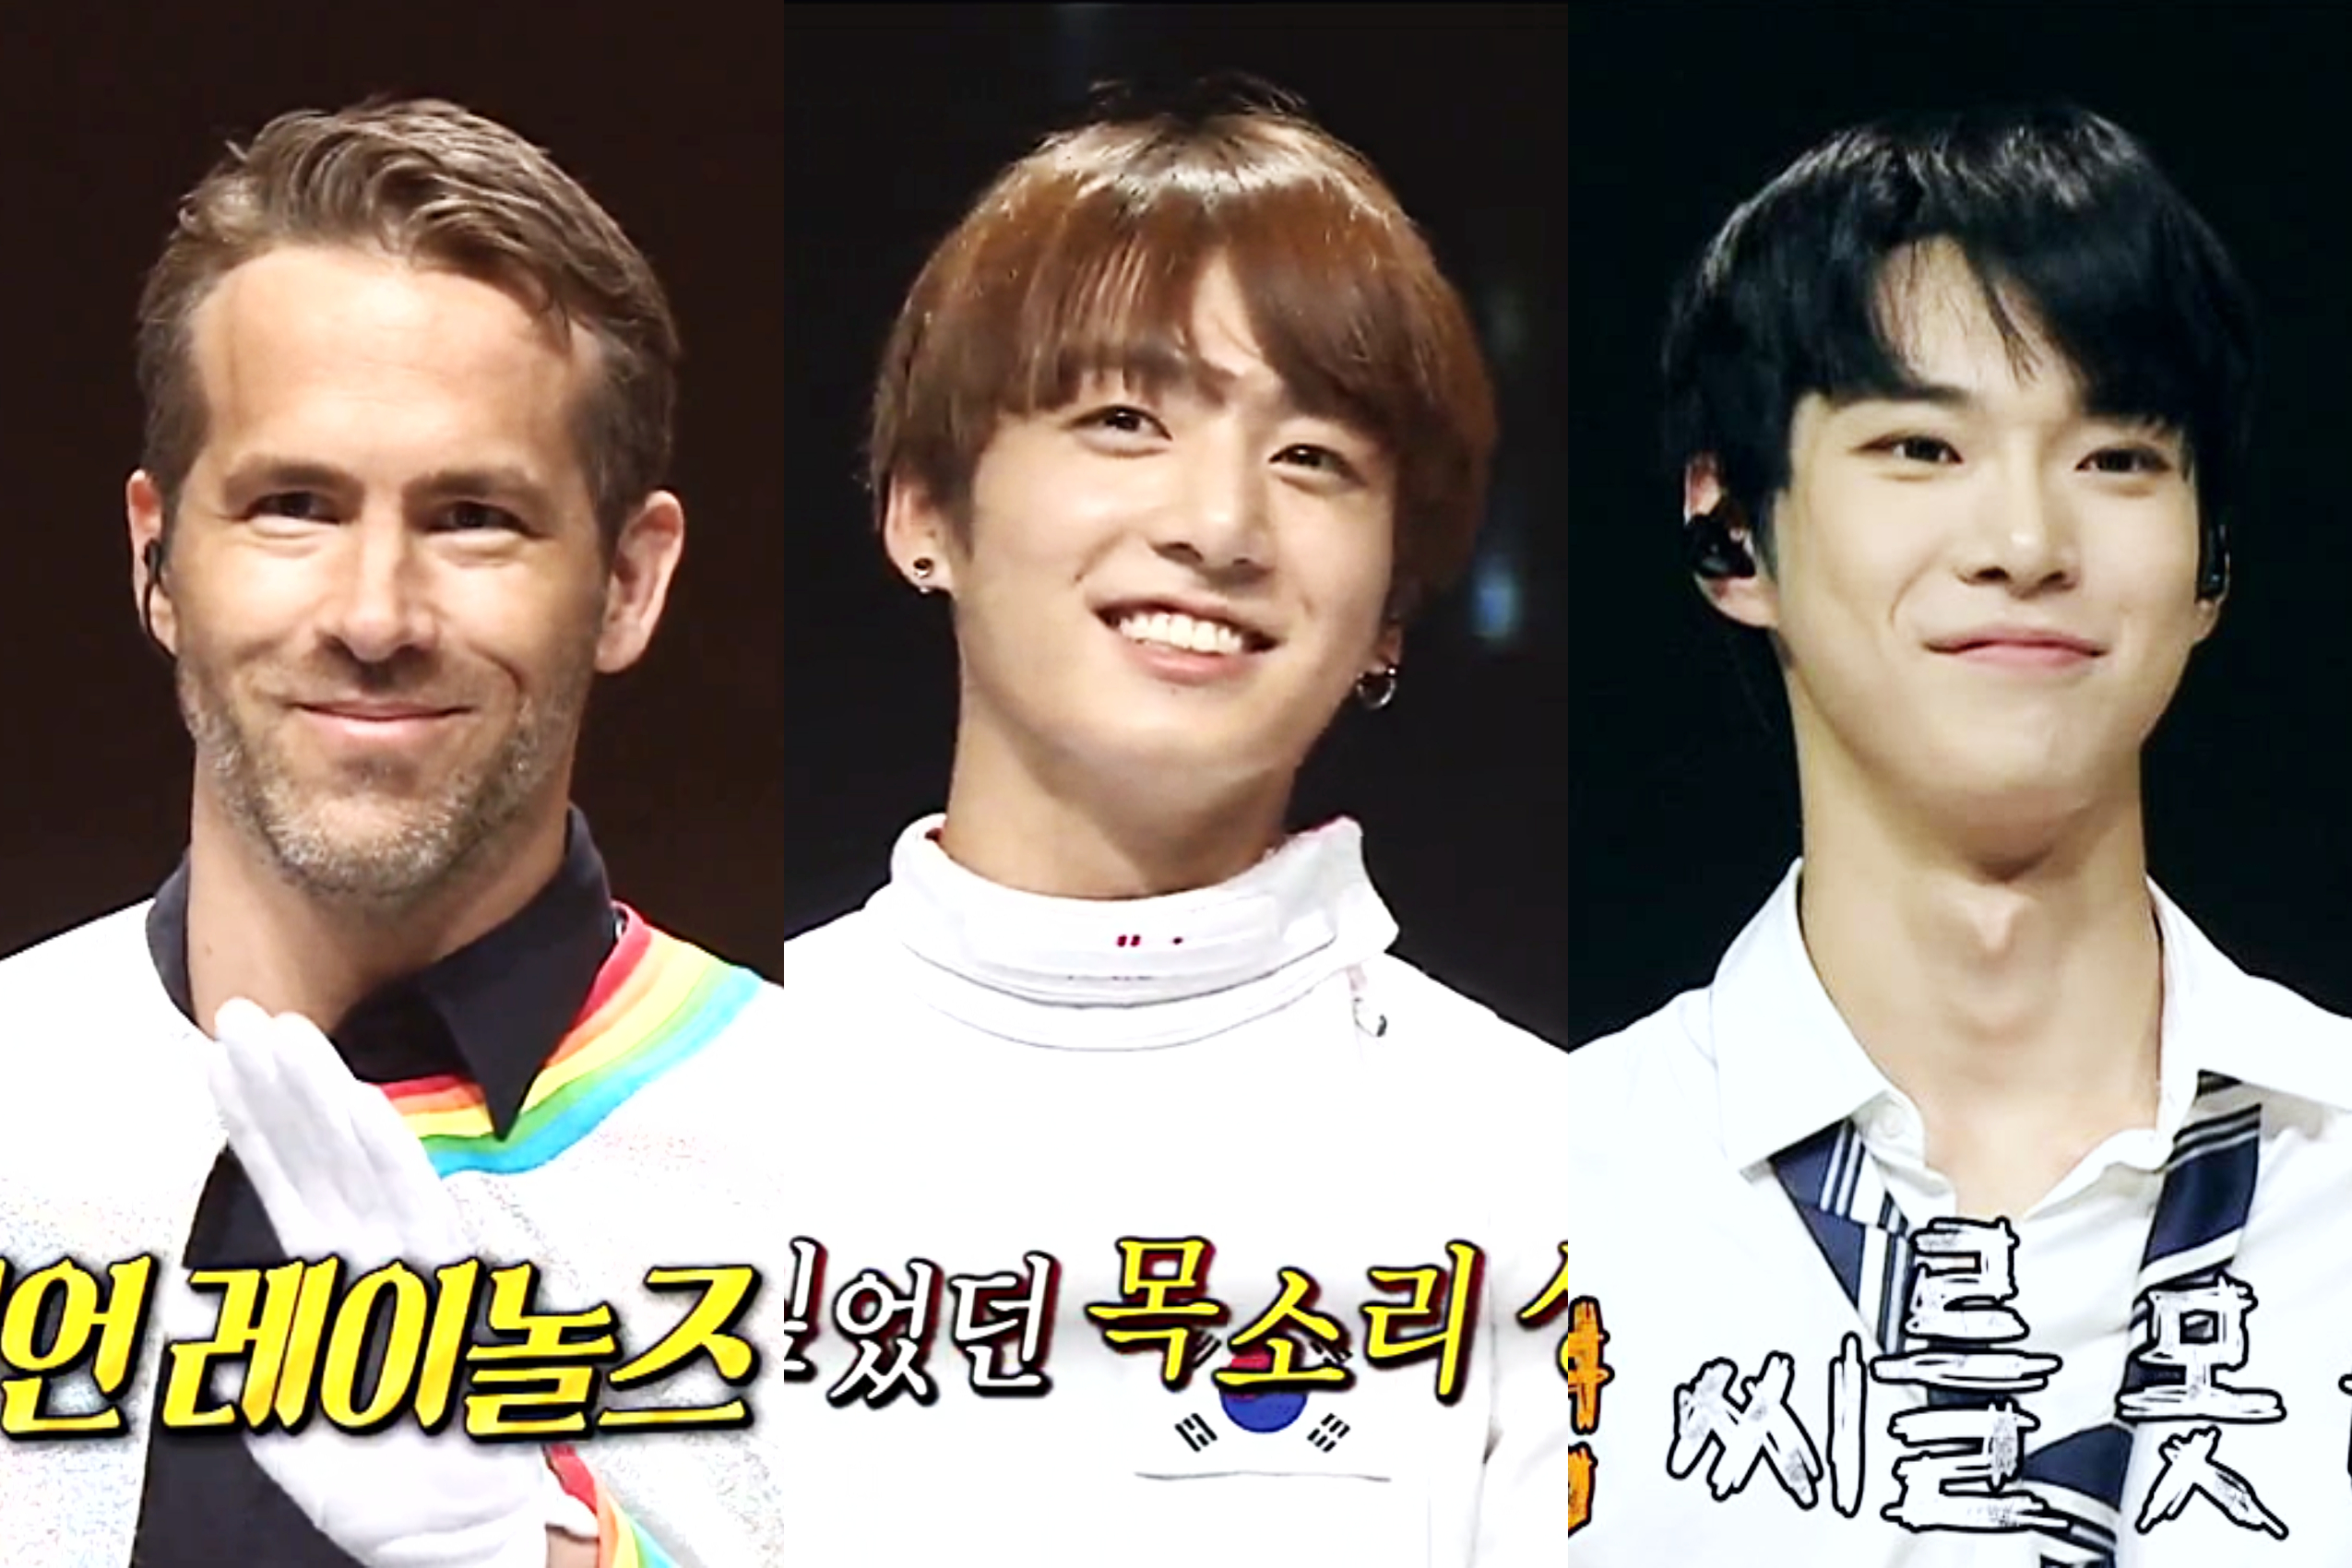 Doyoung, Ryan Reynolds and Jungkook on “The King of Singer”